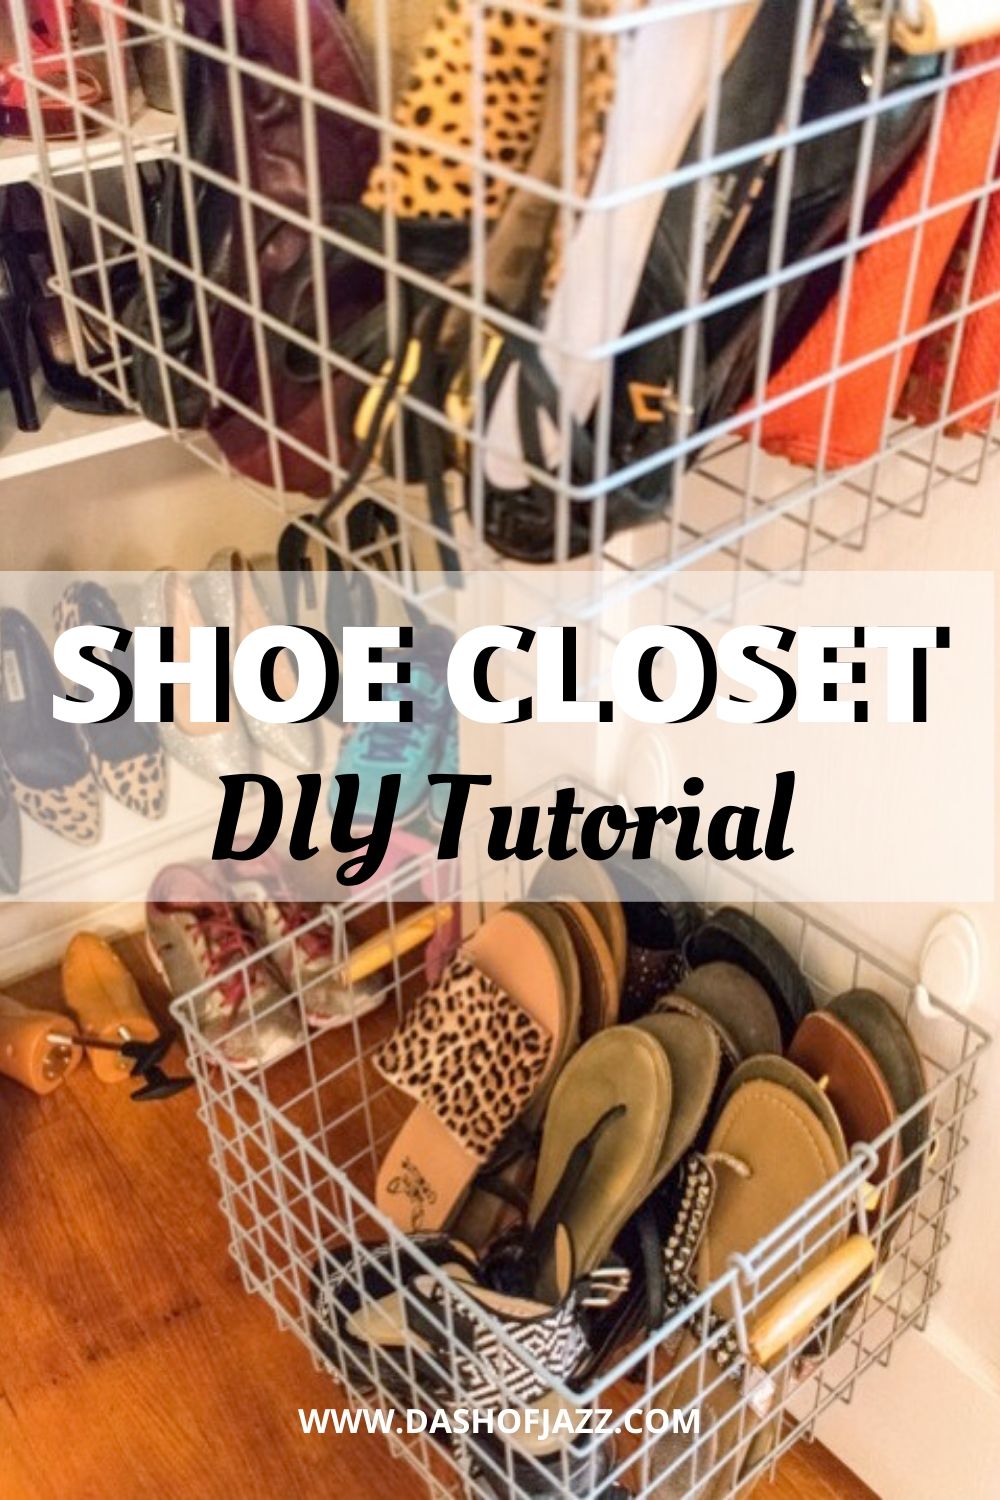 hanging shoe baskets with text overlay "shoe closet DIY tutorial"